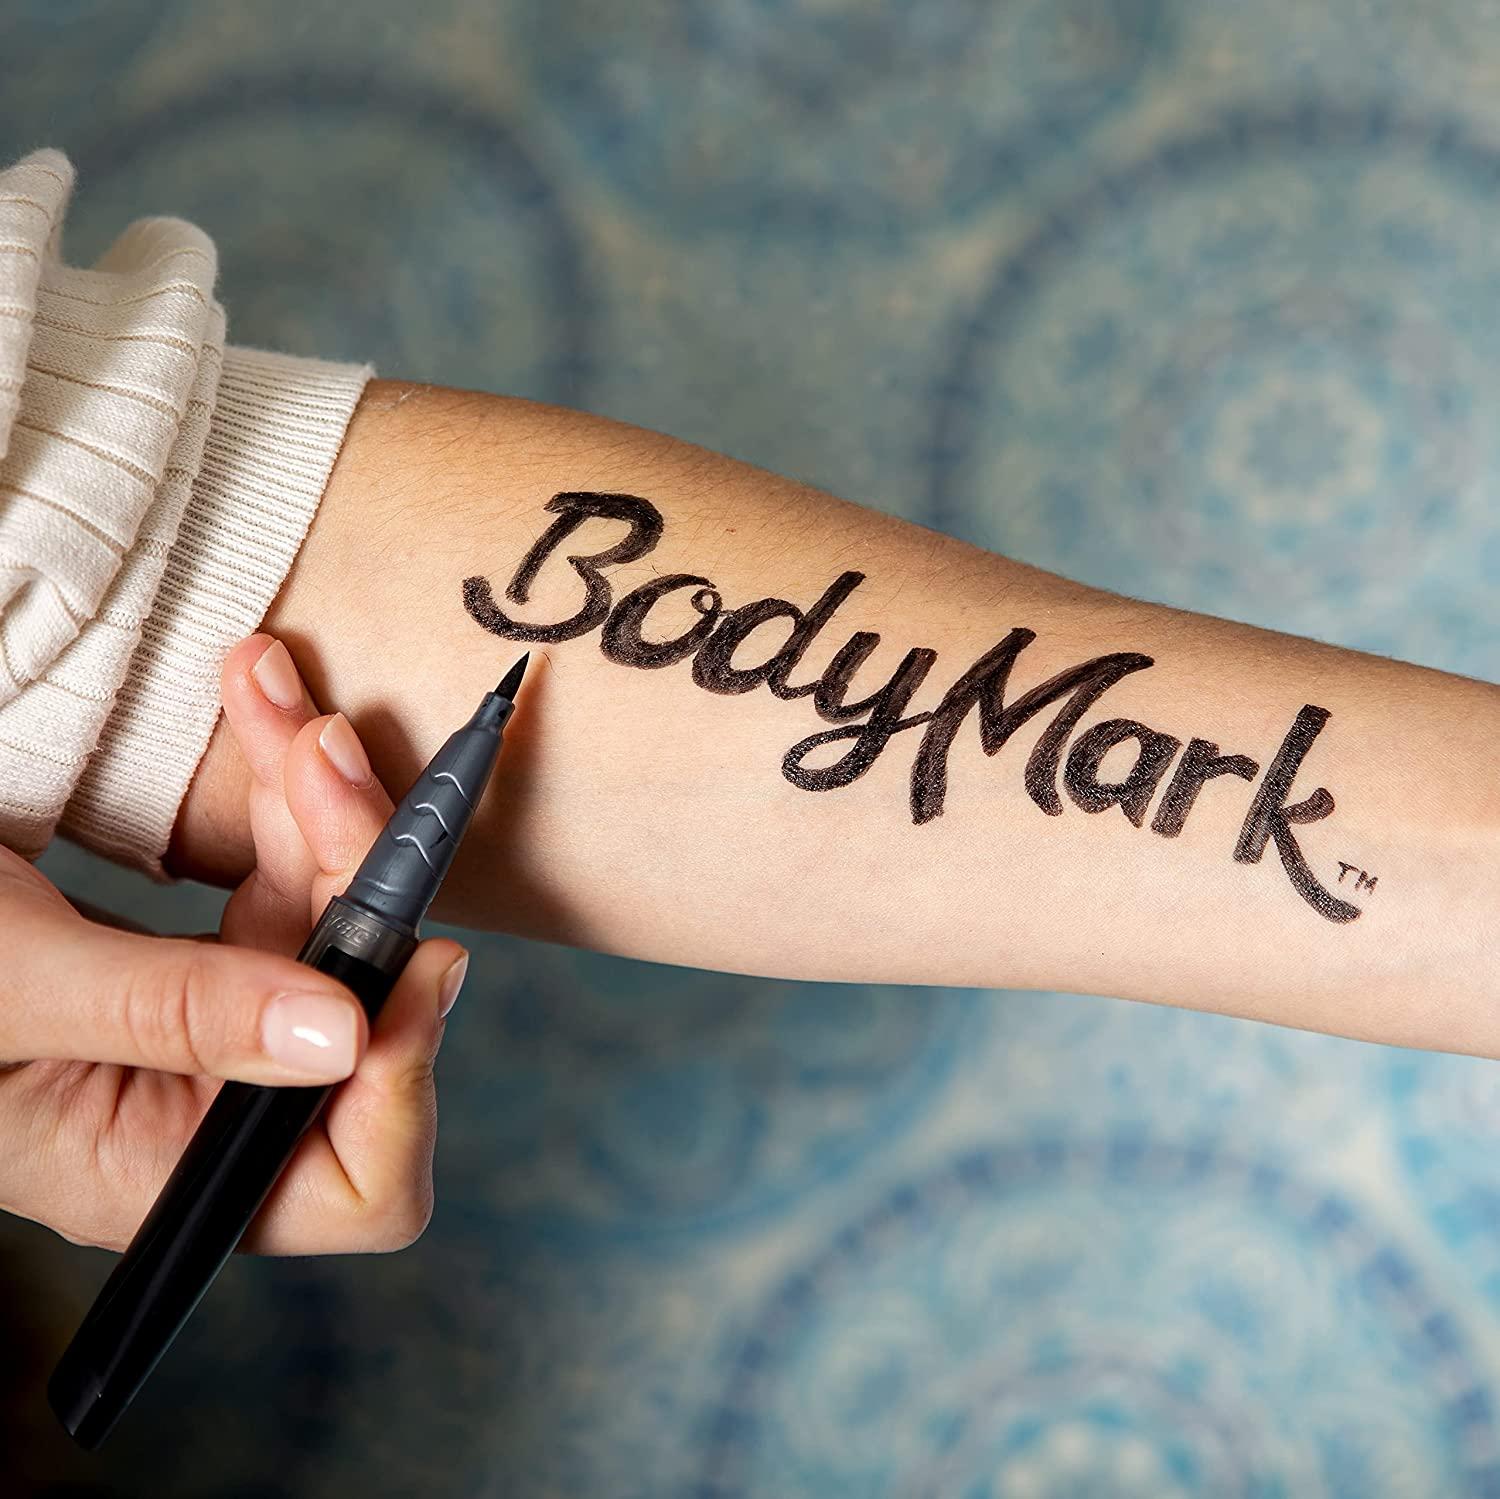 This BodyMark By BIC Temporary Tattoo Marker Review Made Everyone